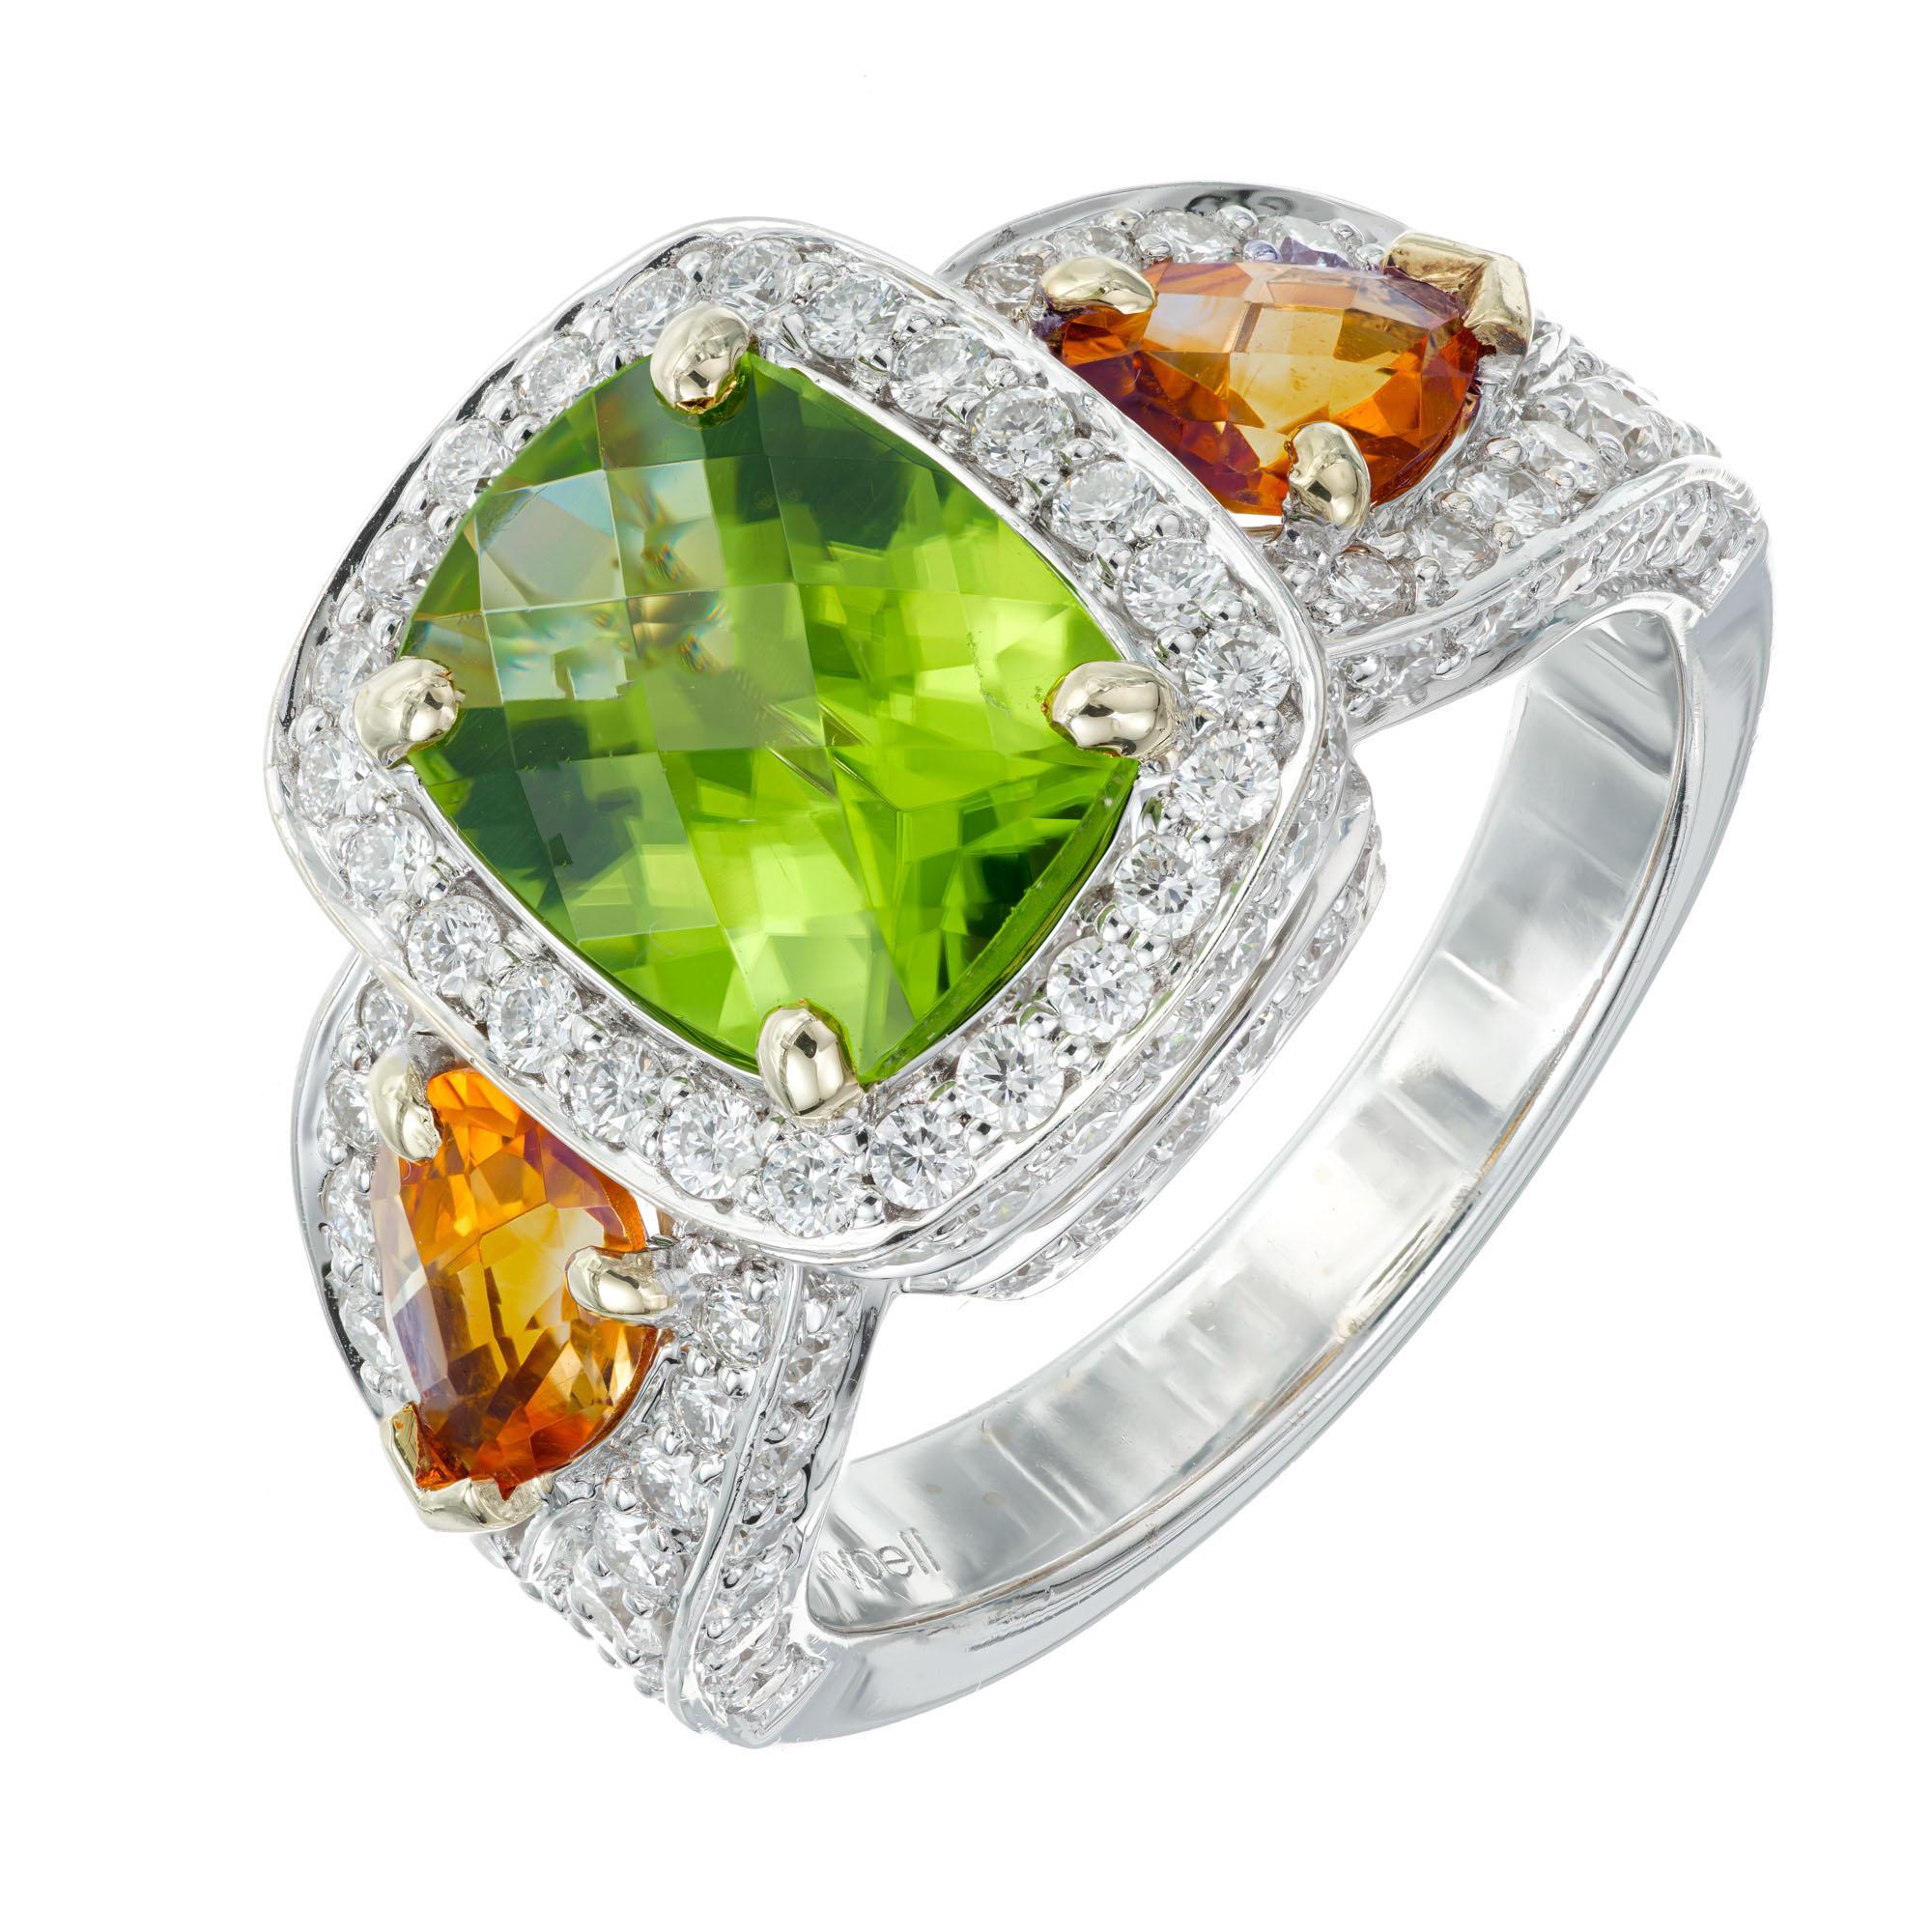 Authentic Charles Krypell Peridot Citrine diamond cocktail ring. 2.80 carat peridot center stone with a halo of 135 full cut diamonds and 2 pear shaped orange citrine in a 18k white gold setting.

1 cushion Peridot 10 x 8mm. approx. total weight